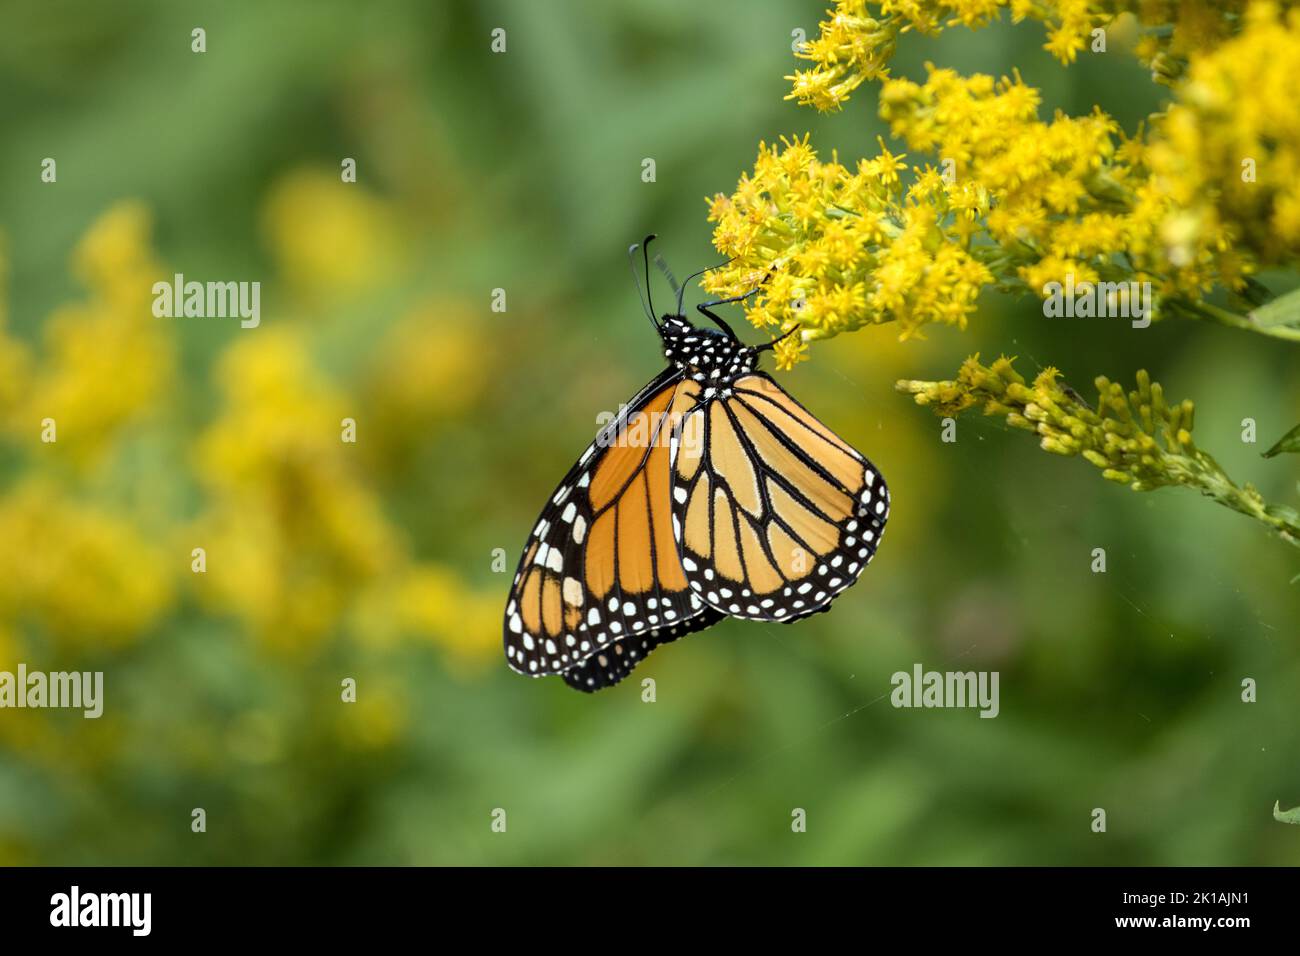 Closeup of a female Monarch Butterfly feeding on pollen from Goldenrod flowers during migration.Scientific name of this insect is Danaus plexippus. Stock Photo